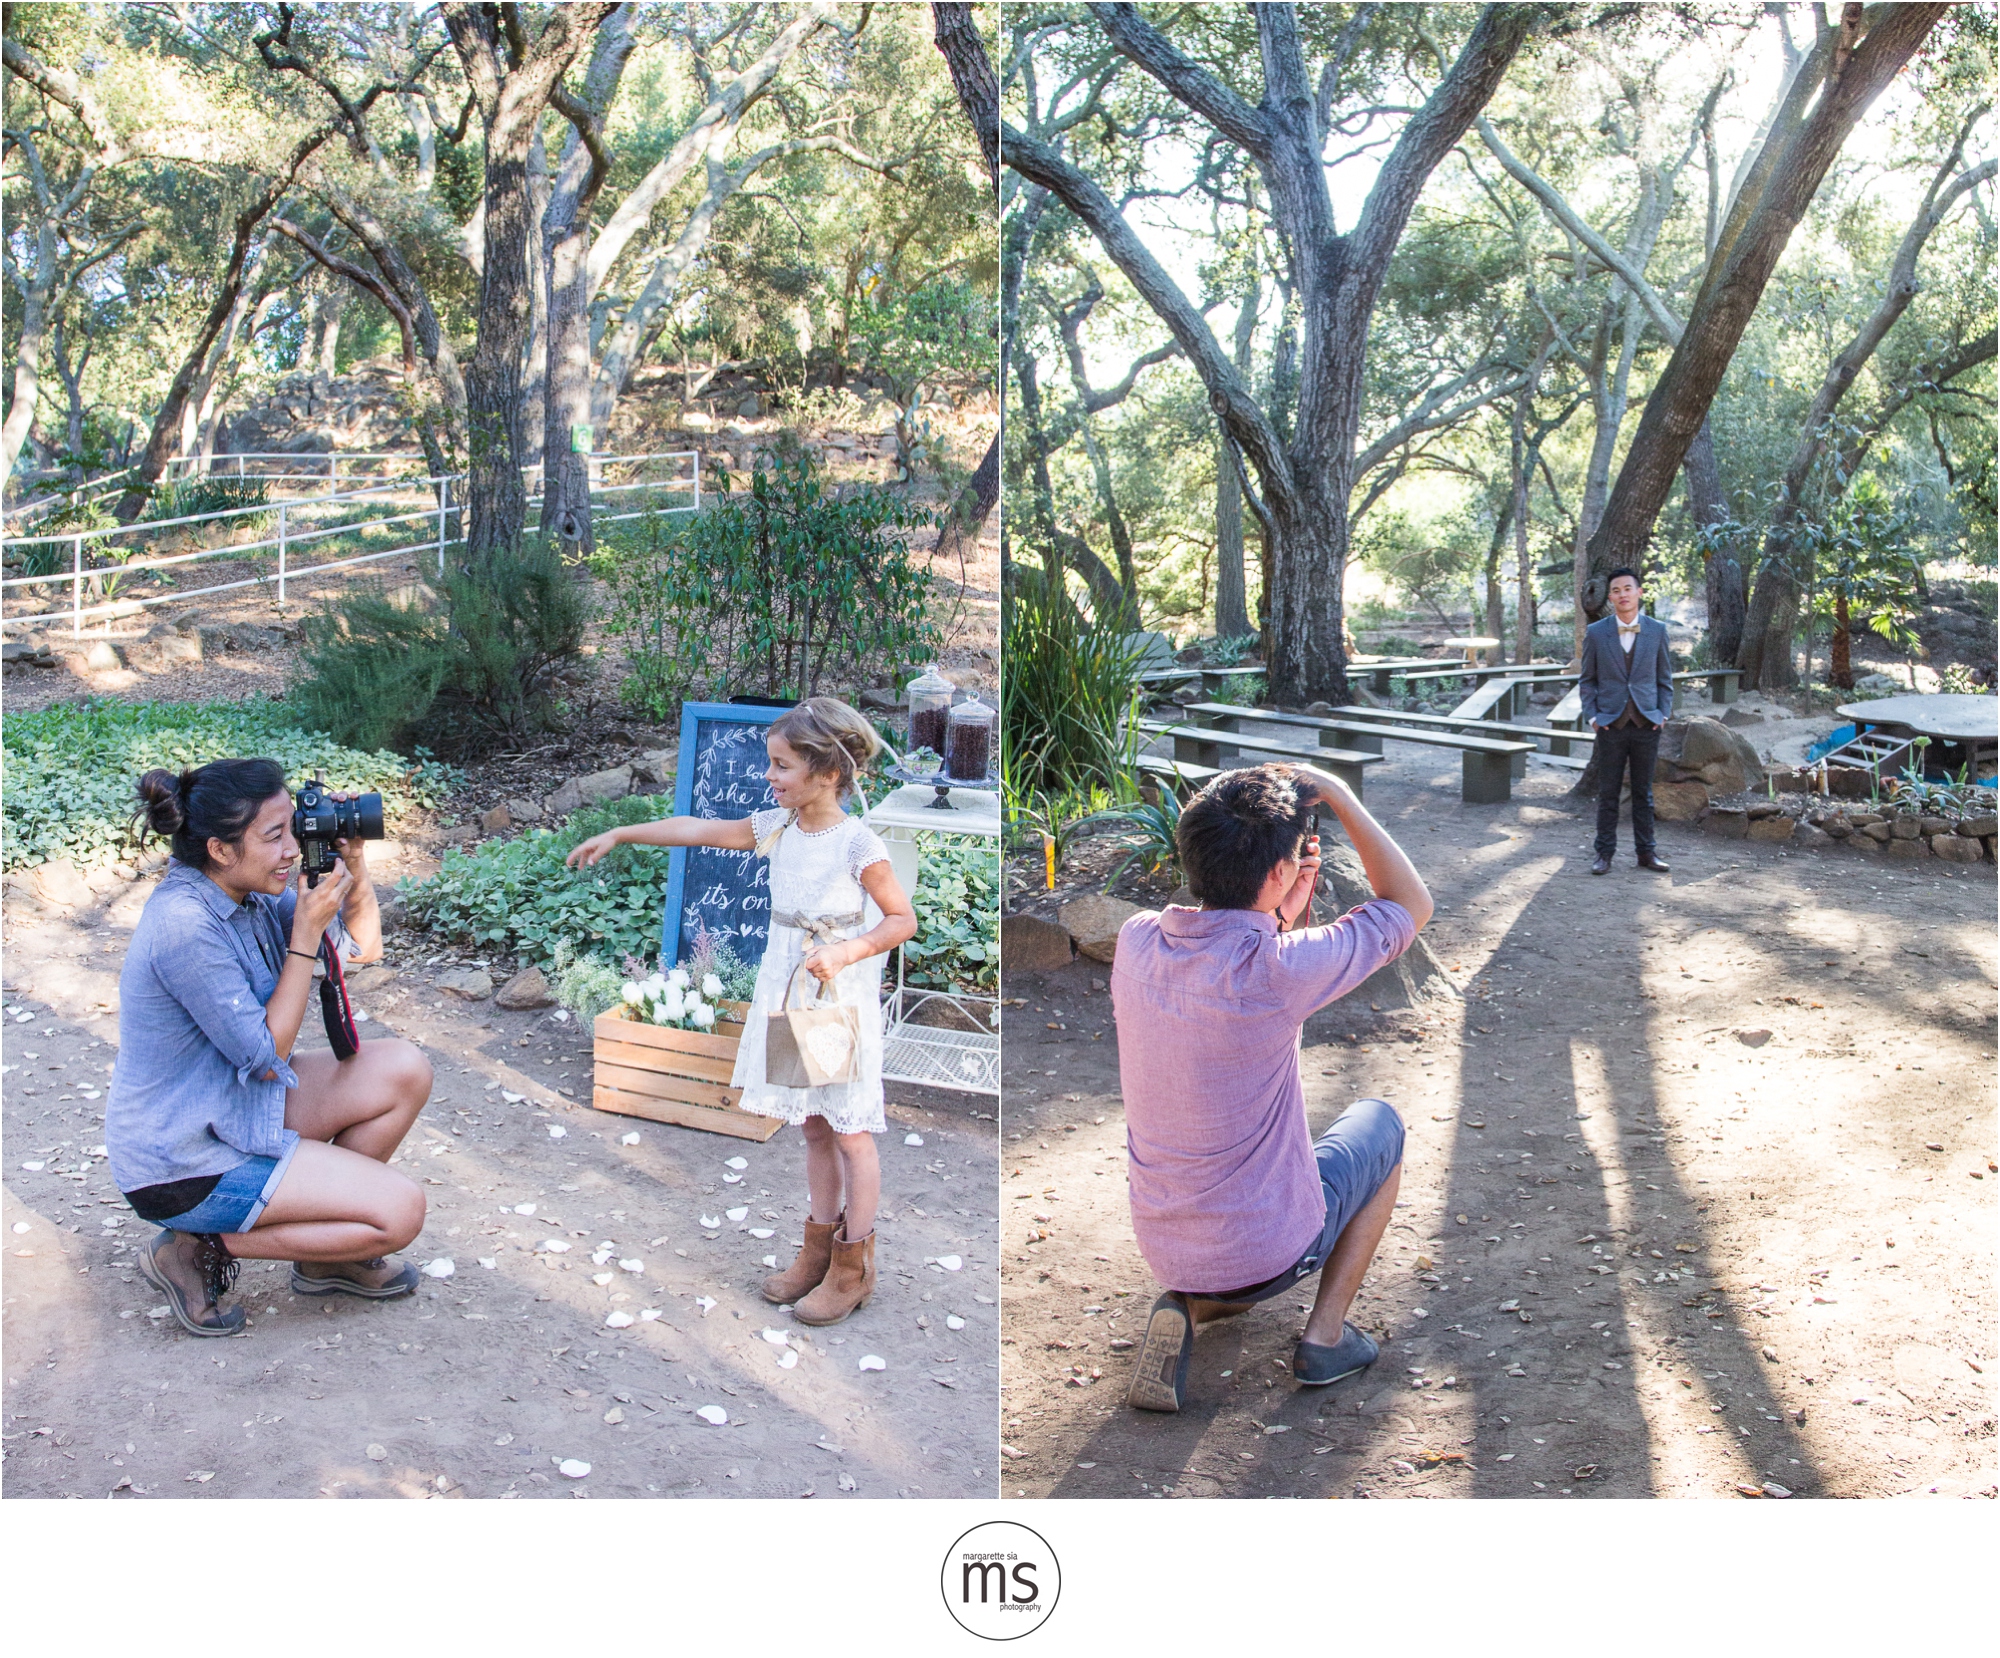 margarette sia photography first wedding_0026